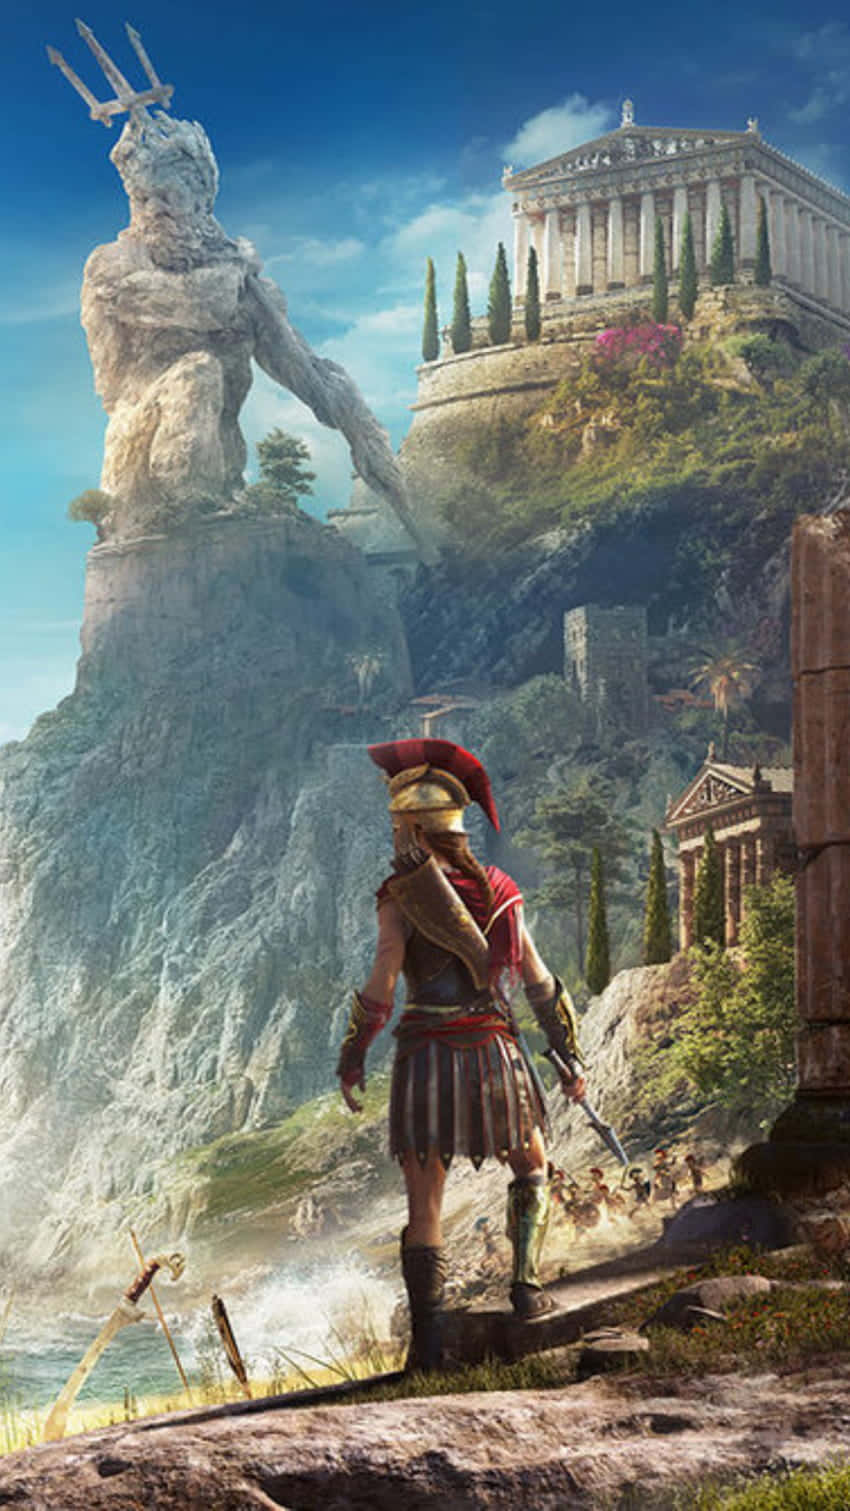 Adventure Through Ancient Greece in Android Assassin's Creed Odyssey